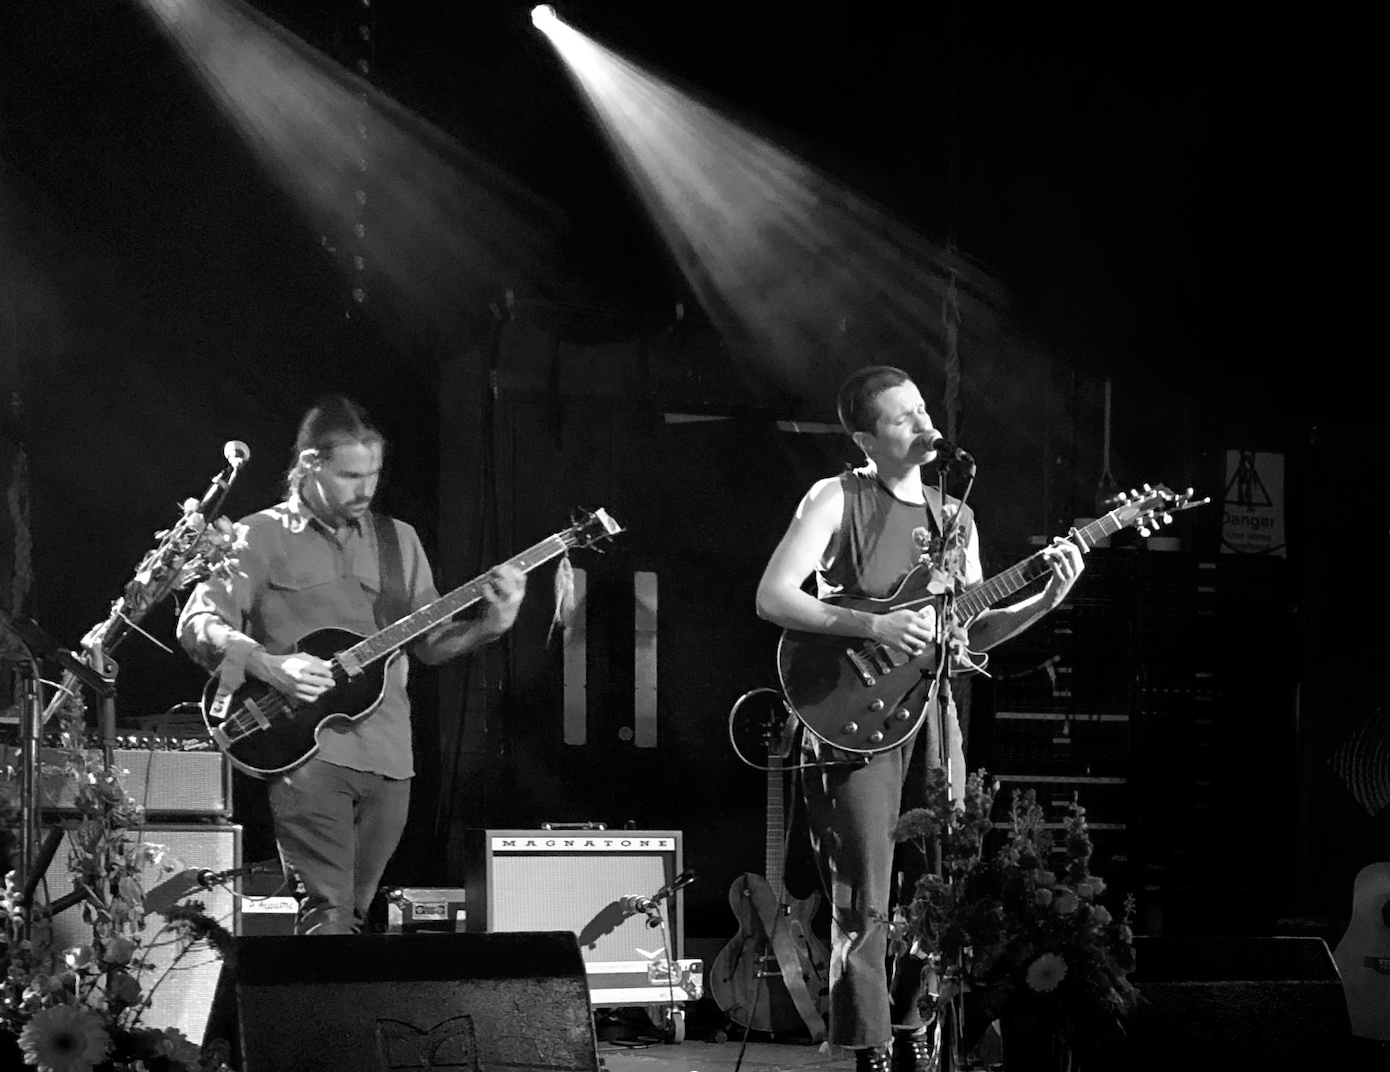 The band, Big Thief playing live onstage. Lead singer, Adrianne Lenker, is illuminated. The photo is in black and white